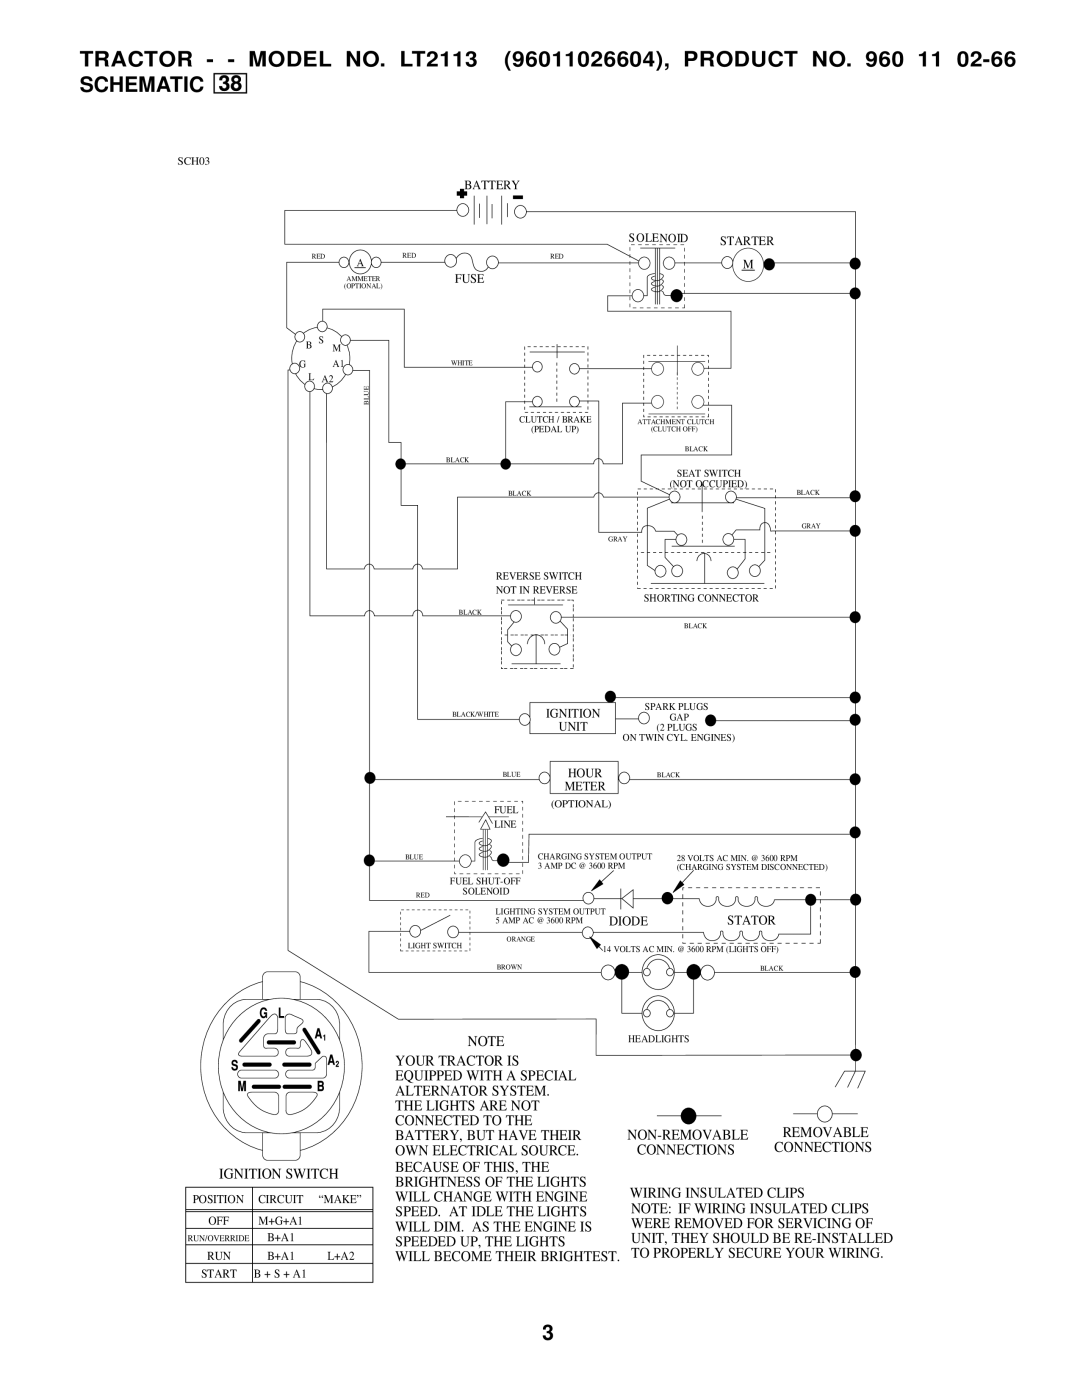 Jonsered manual TRACTOR - - MODEL NO. LT2113 96011026604, PRODUCT NO. 960 11, Schematic, Ignition Switch 